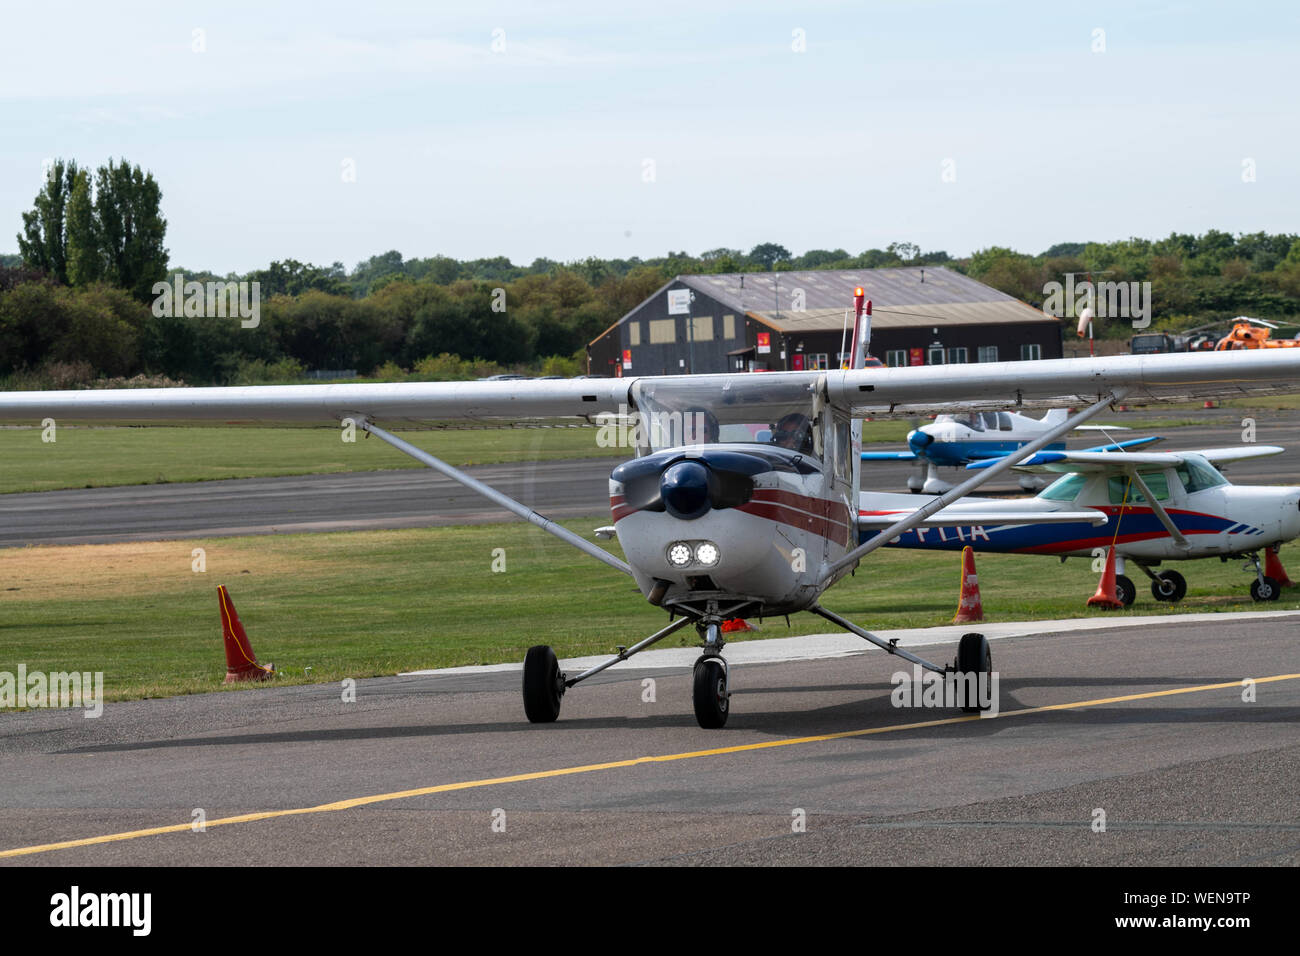 Reims Cessna FA152, G-bhmg, lands from a training flight at North Weald Airfield Stock Photo